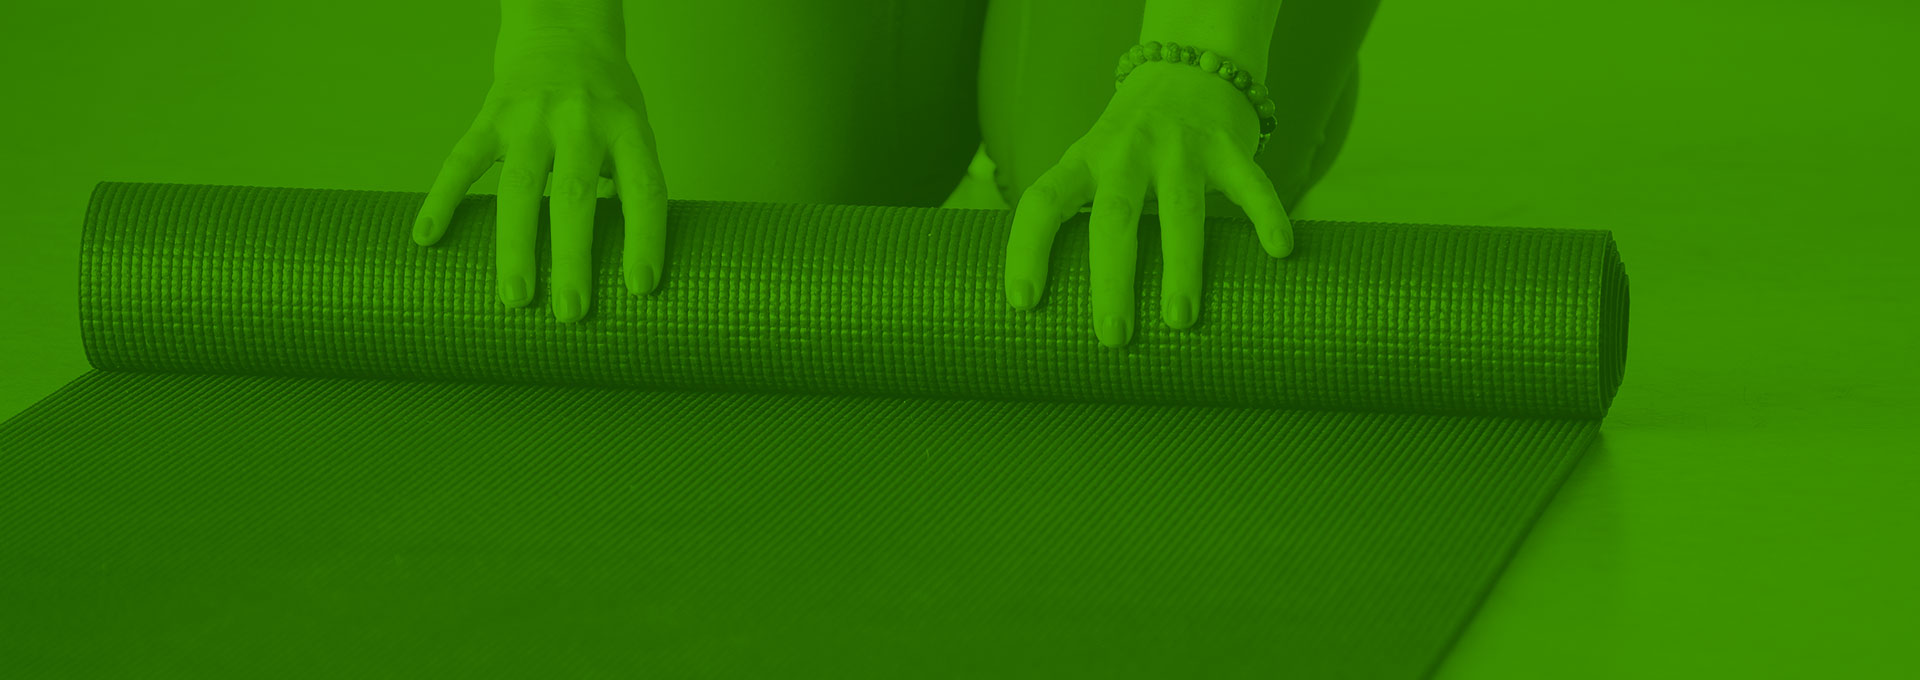 Best sustainable gym equipment brands — wellness spaces + gym consultants